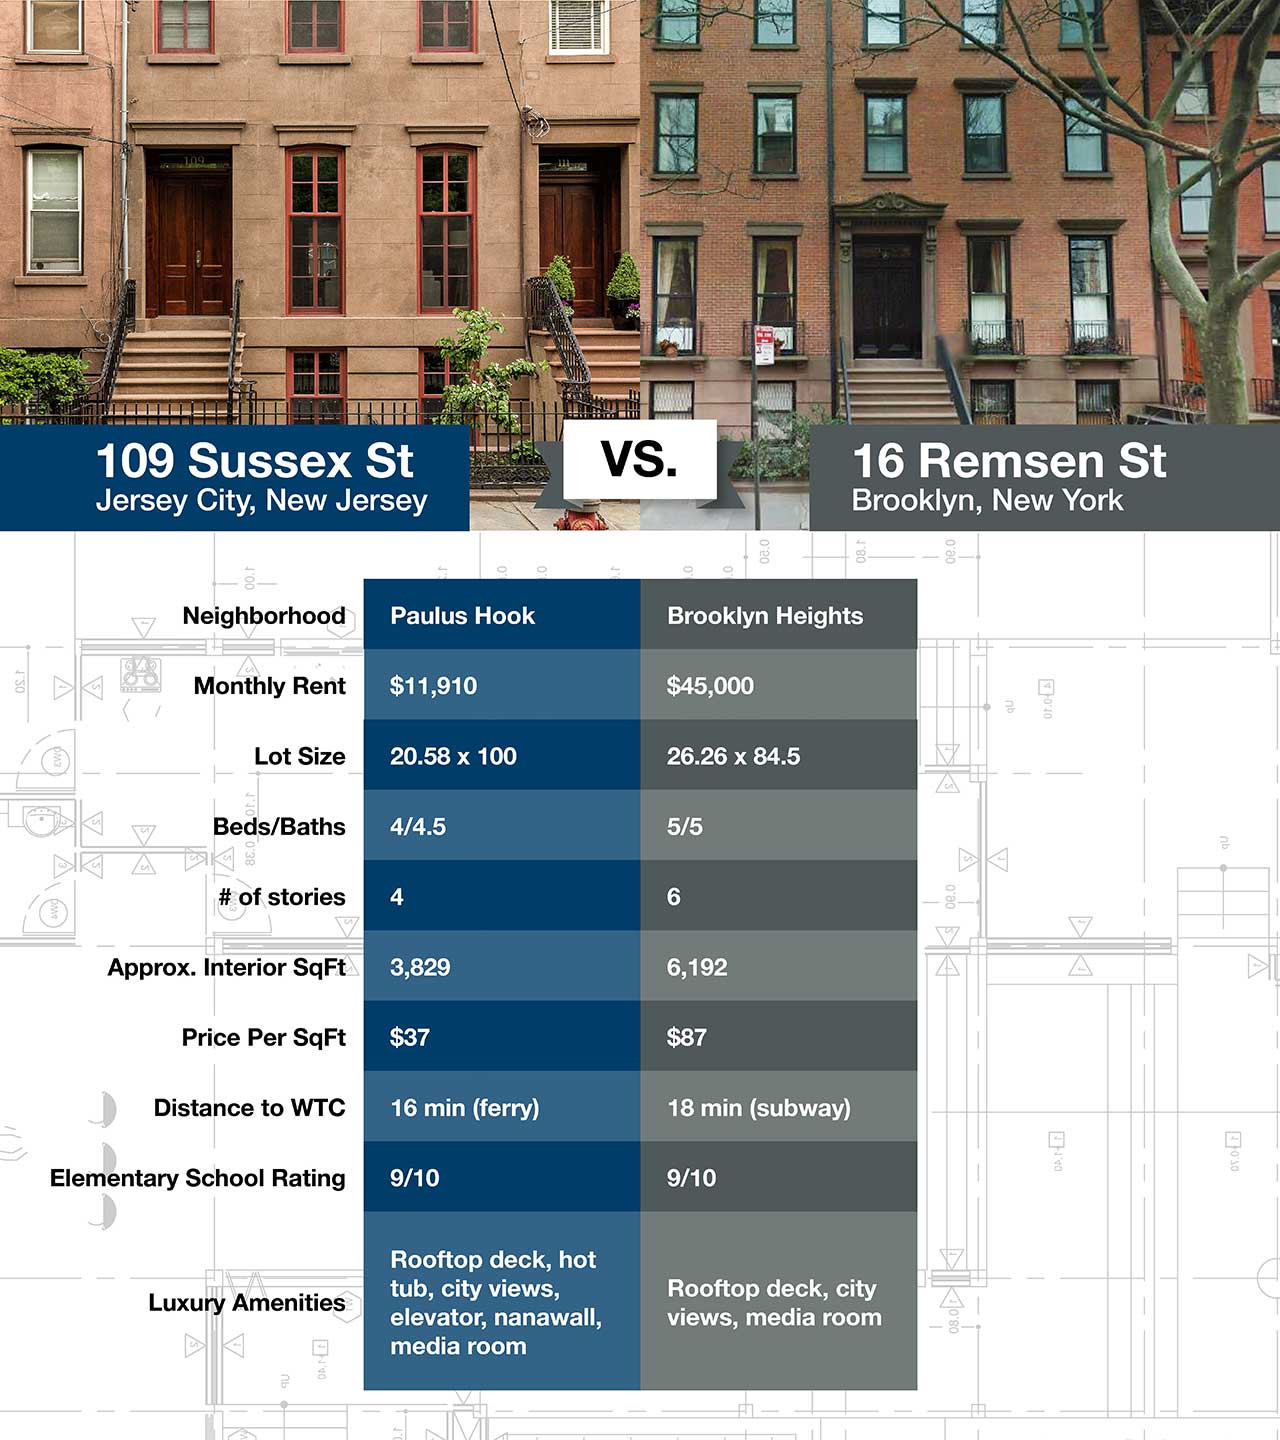 22 Lovely Hardwood Flooring Jersey City Nj 2024 free download hardwood flooring jersey city nj of paulus hook vs brooklyn heights buyers find better value in wall in jersey city versus brooklyn inforgraphic